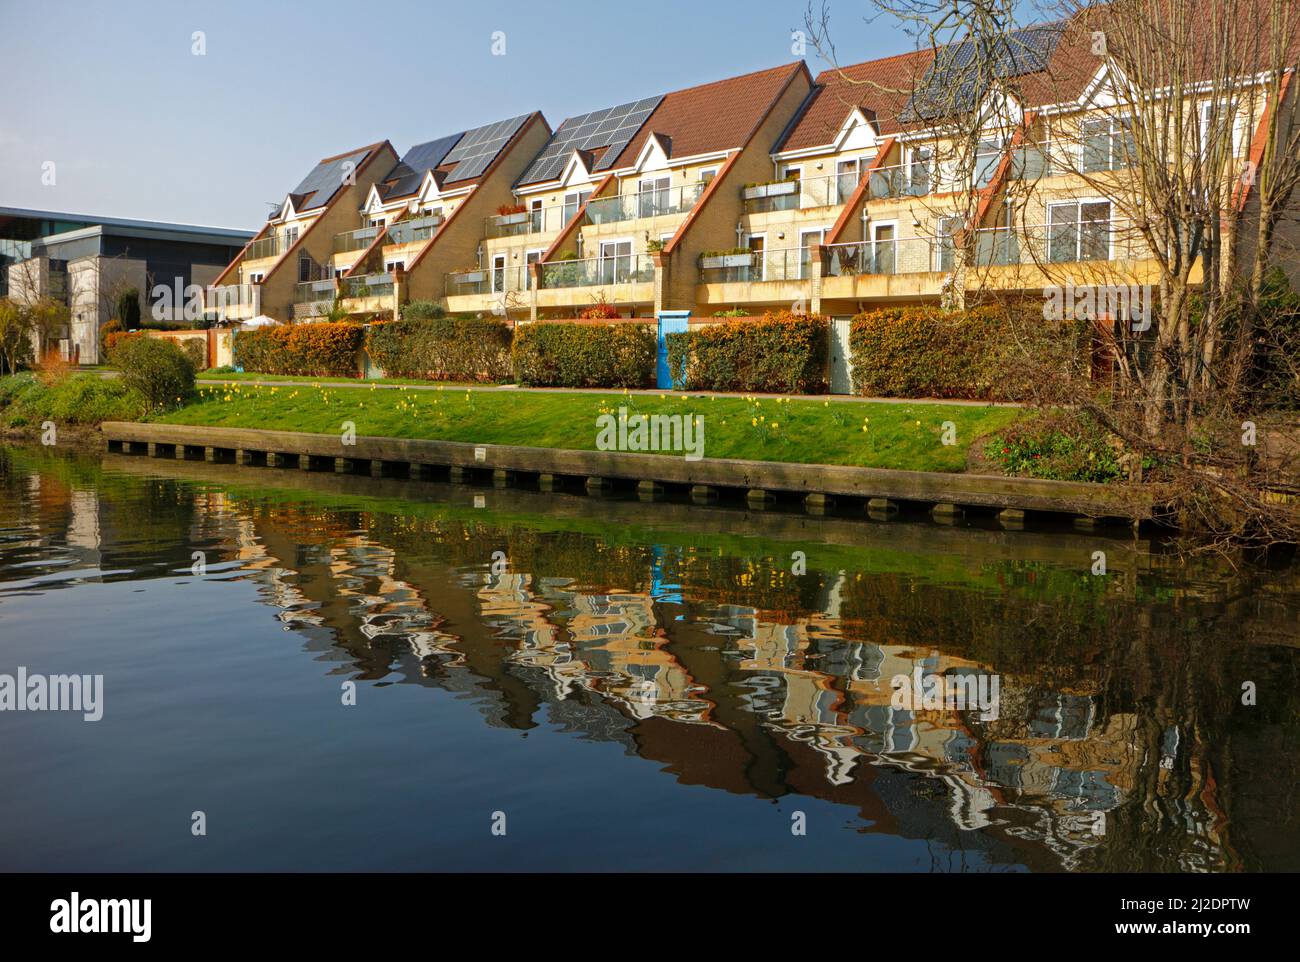 A modern build of flats by the River Wensum with reflections in the river off Barrack Street in the City of Norwich, Norfolk, England, UK. Stock Photo